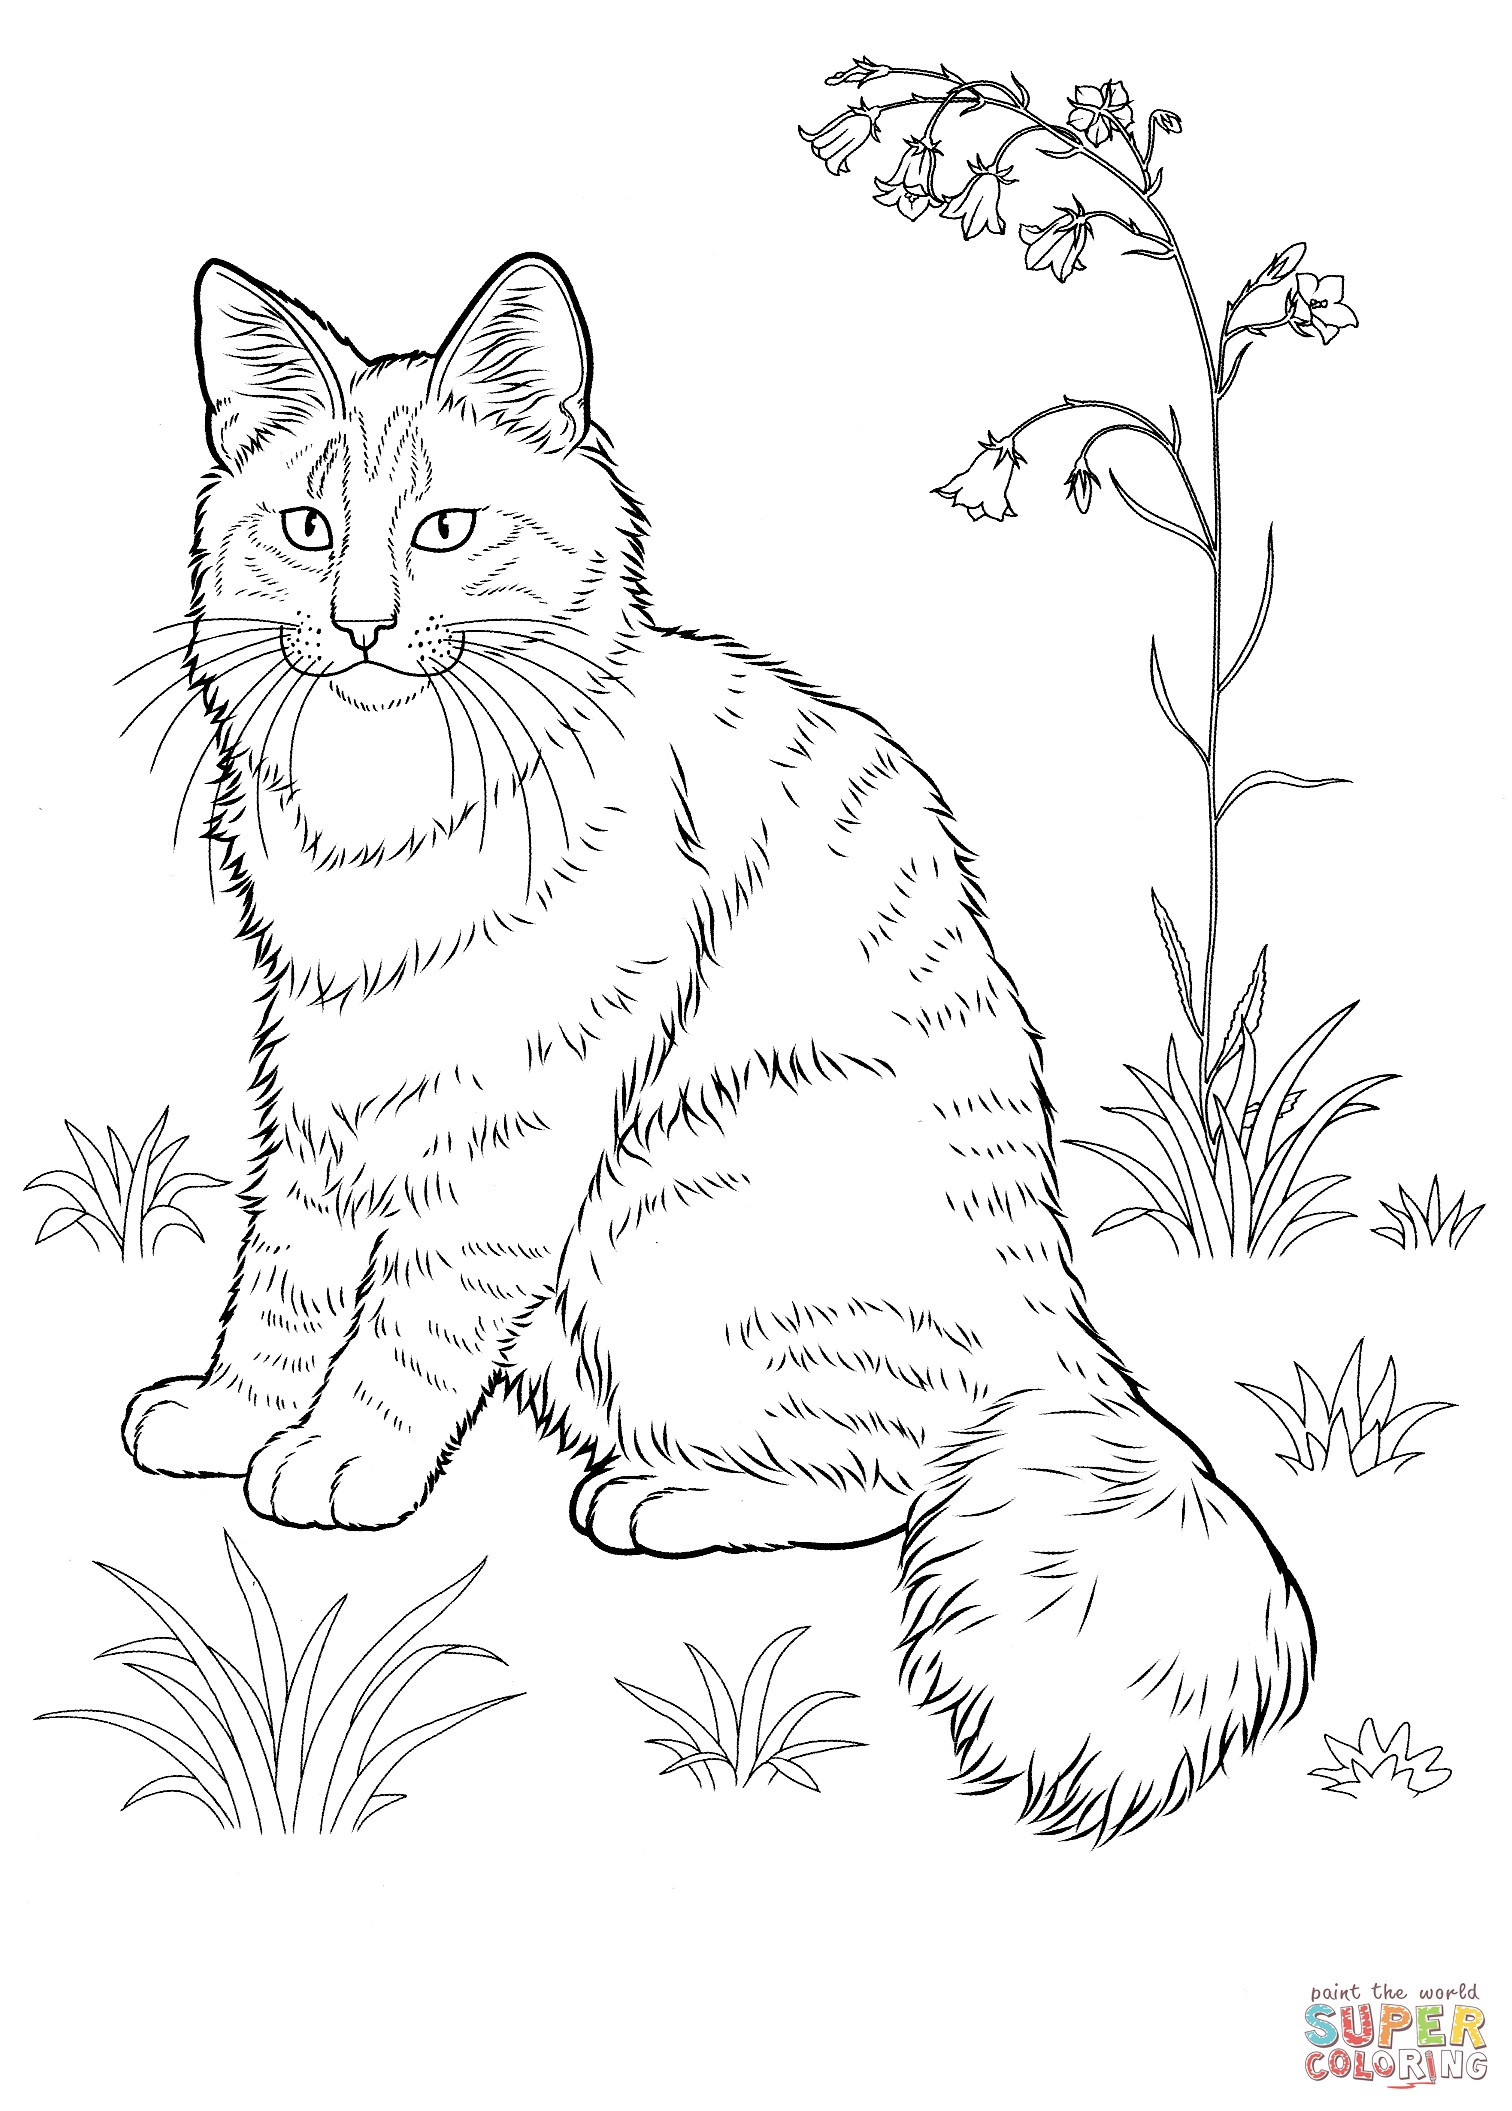 Realistic Cat Coloring Pages - BubaKids.com